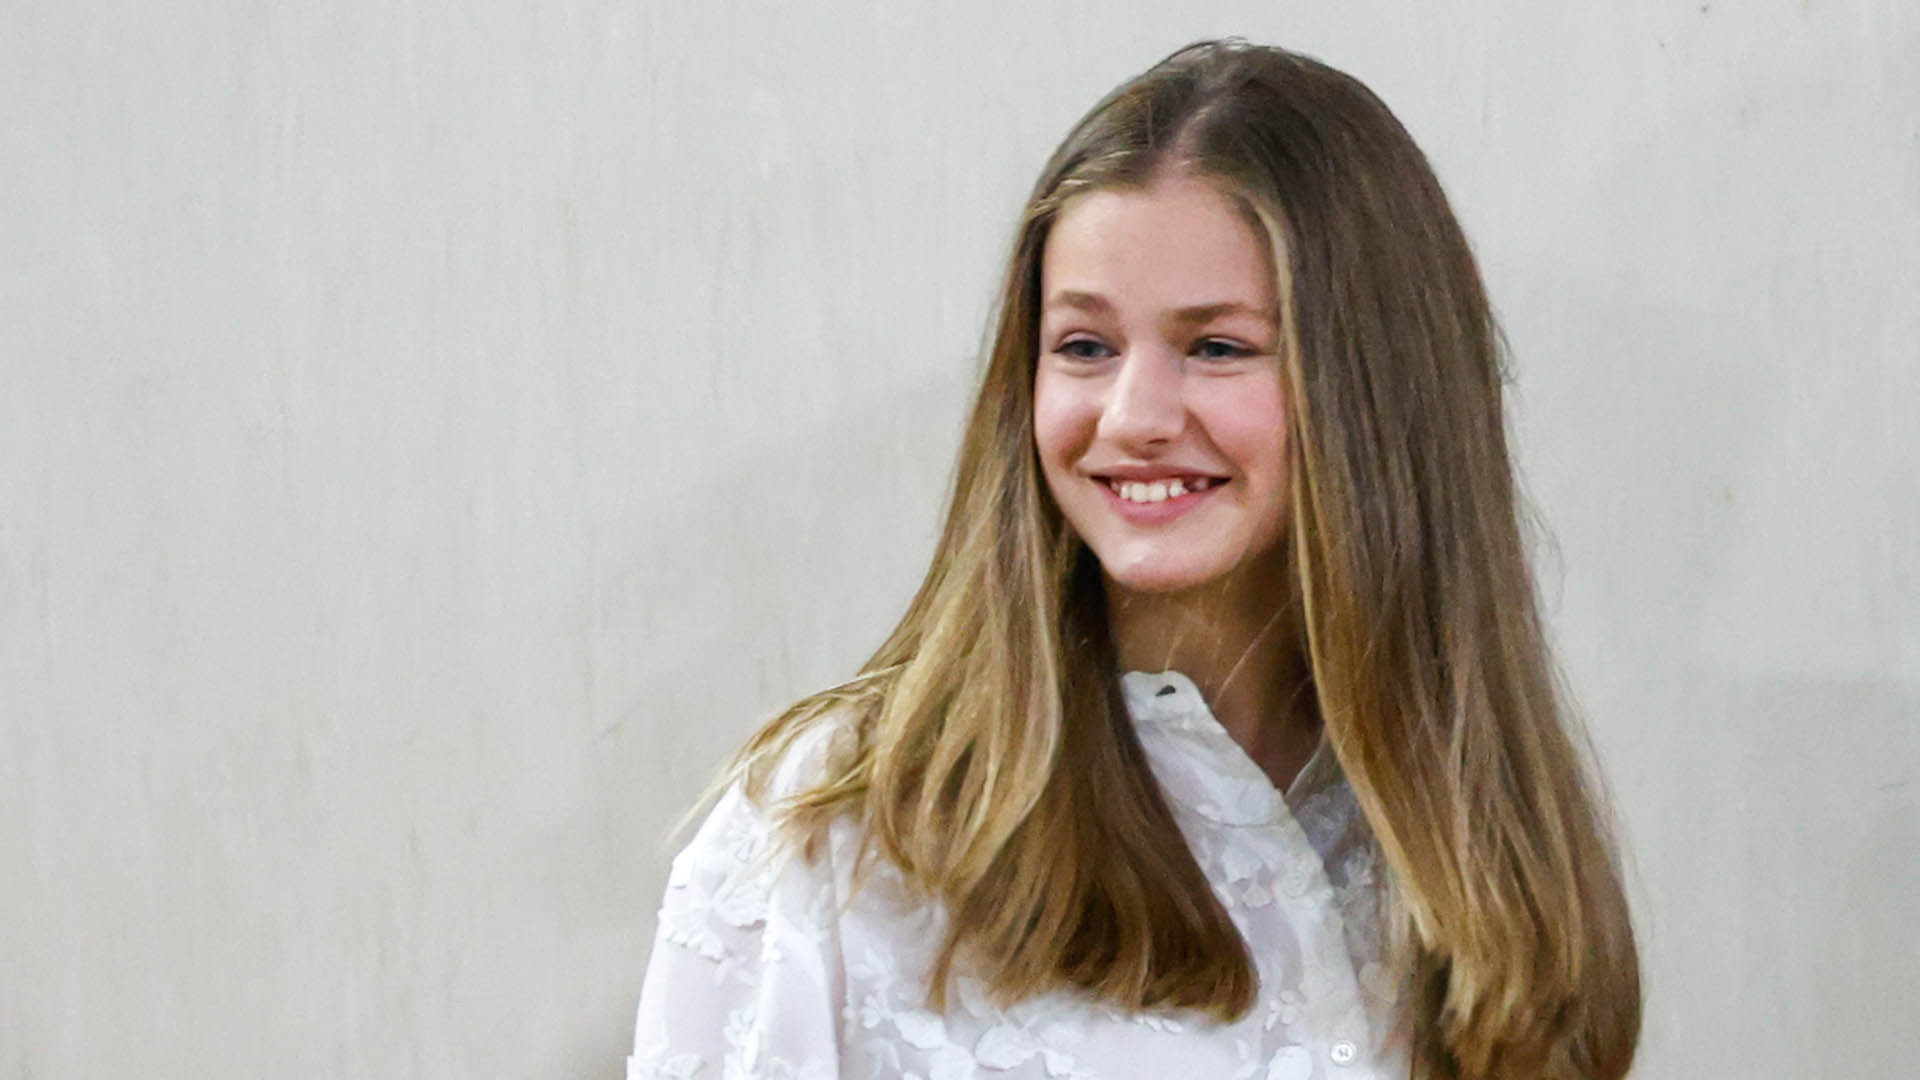 Princess of Asturias Leonor de Borbon during Youth and Cybersecurity Summit: Enjoy Internet Safely in Leganes, Madrid on Wednesday, 20 April 2022.